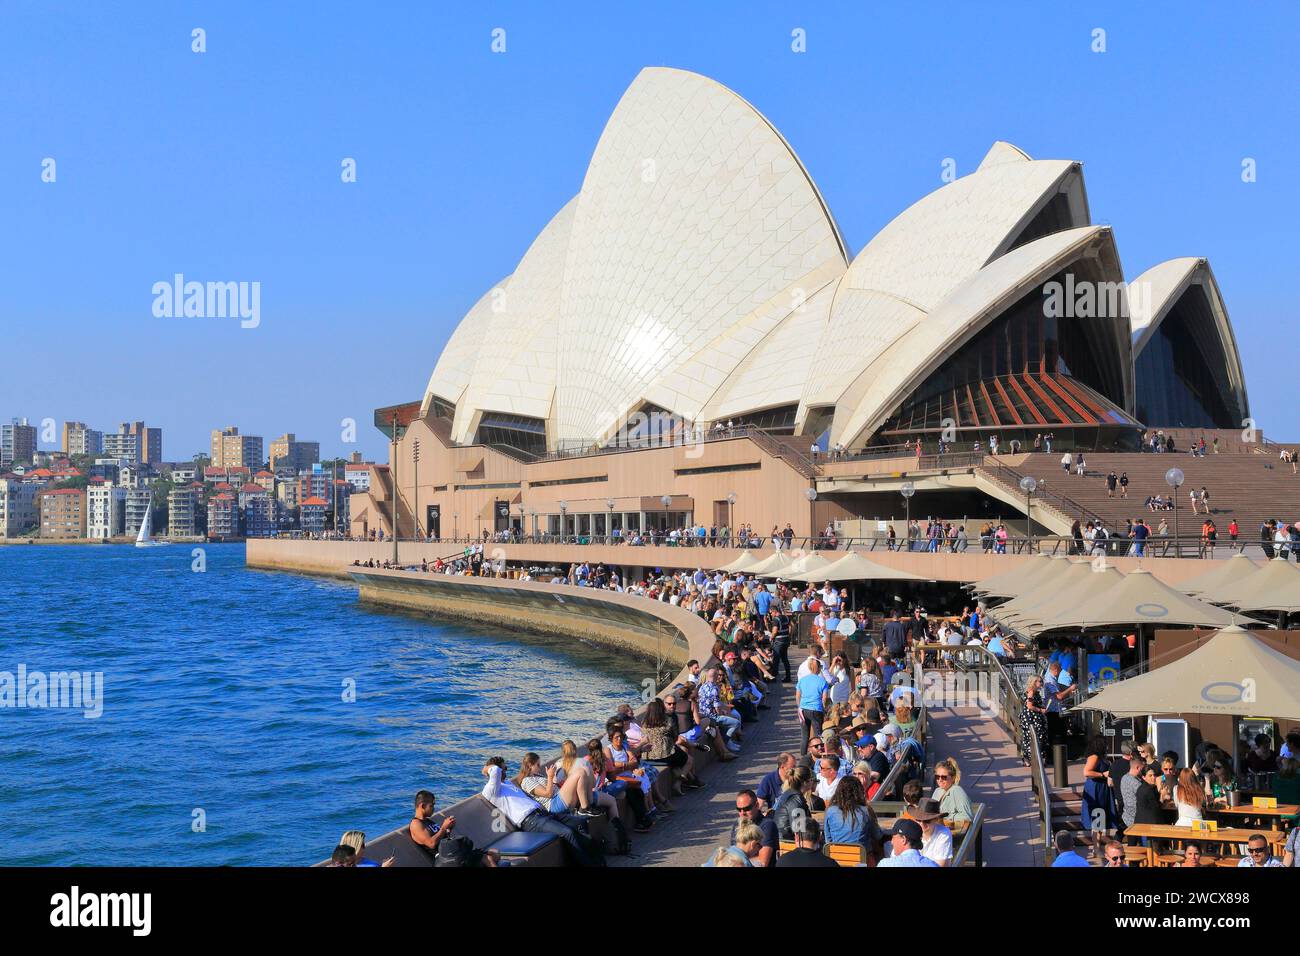 Australia, New South Wales, Sydney, Bennelong Point, Opera House (Sydney Opera House) designed by Dane Jørn Utzon and inaugurated in 1973 Stock Photo